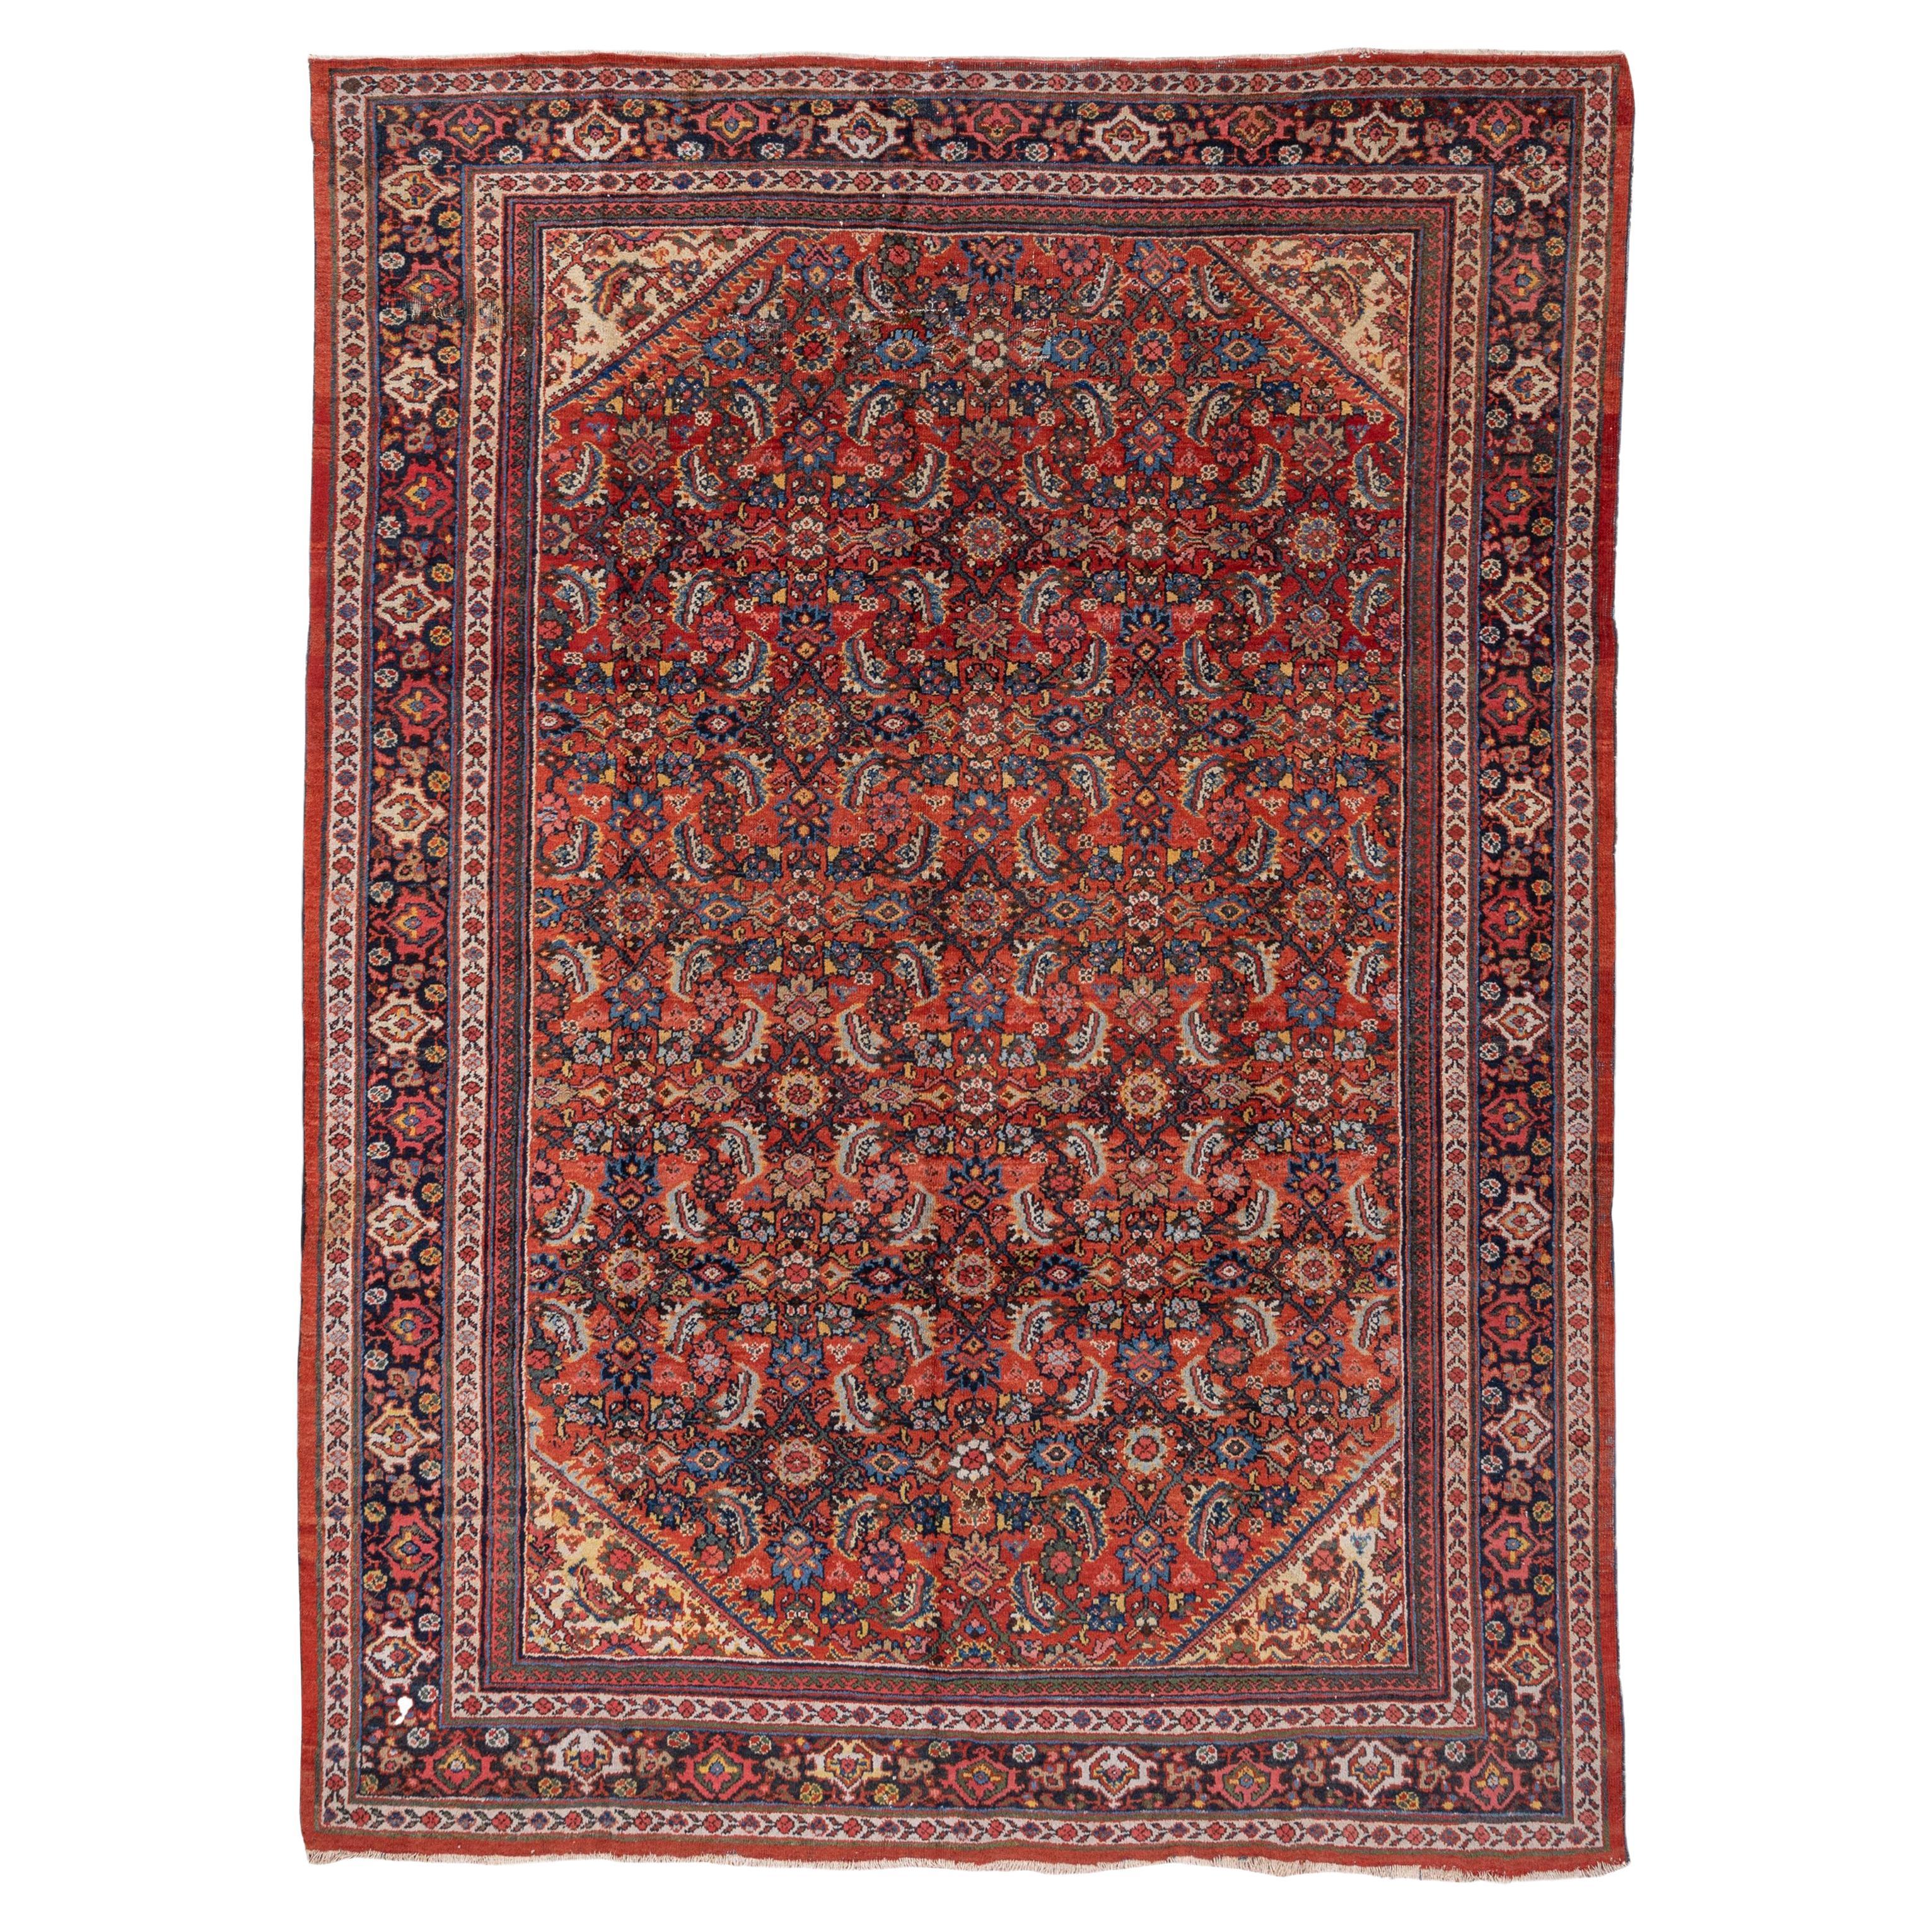 Antique Mahal Rug, Red Field, circa 1920s